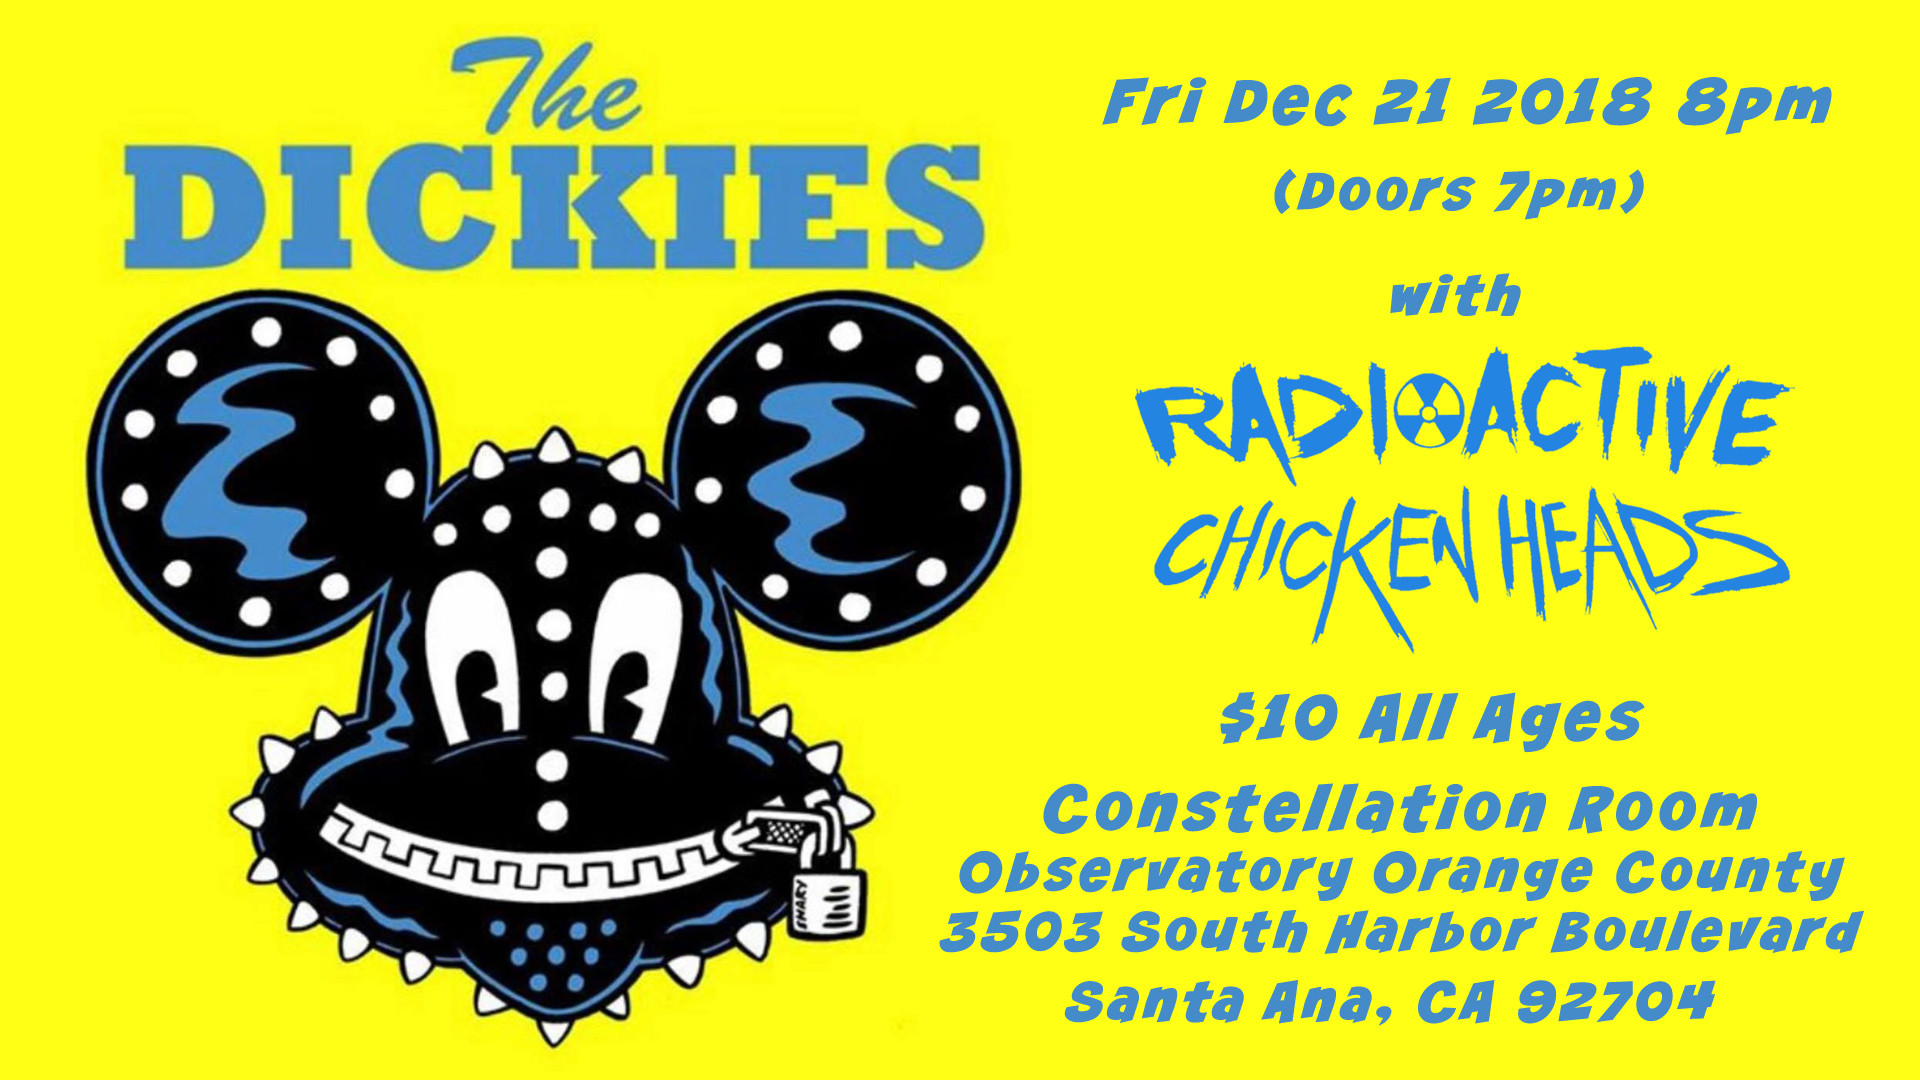 1920x1080 The Dickies Radioactive Chicken Heads Observatory Orange County